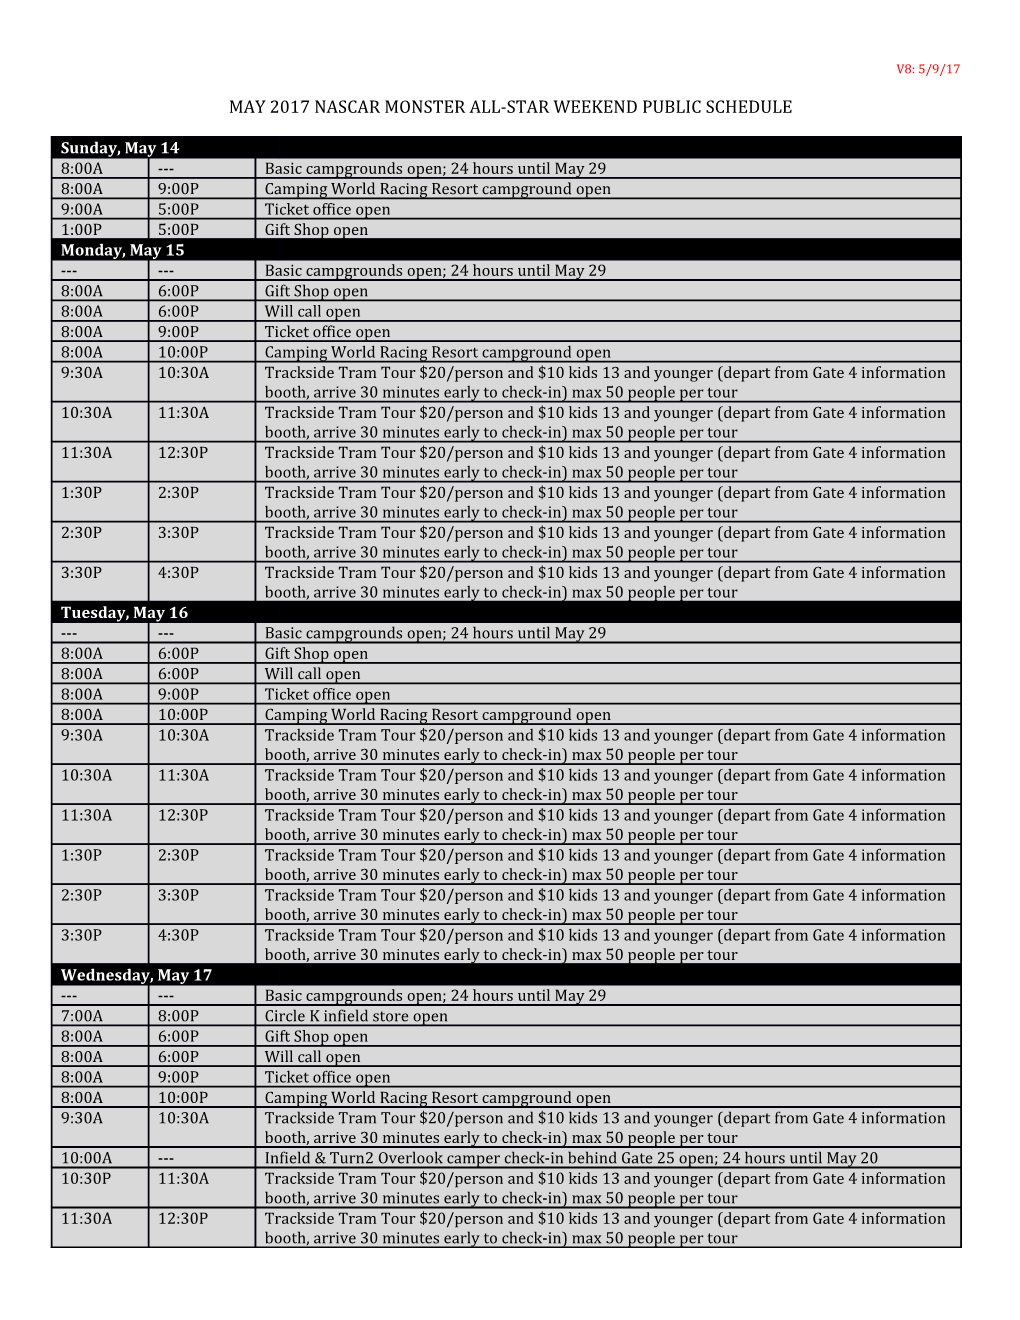 May 2017 Nascar Monster All-Star Weekend Public Schedule